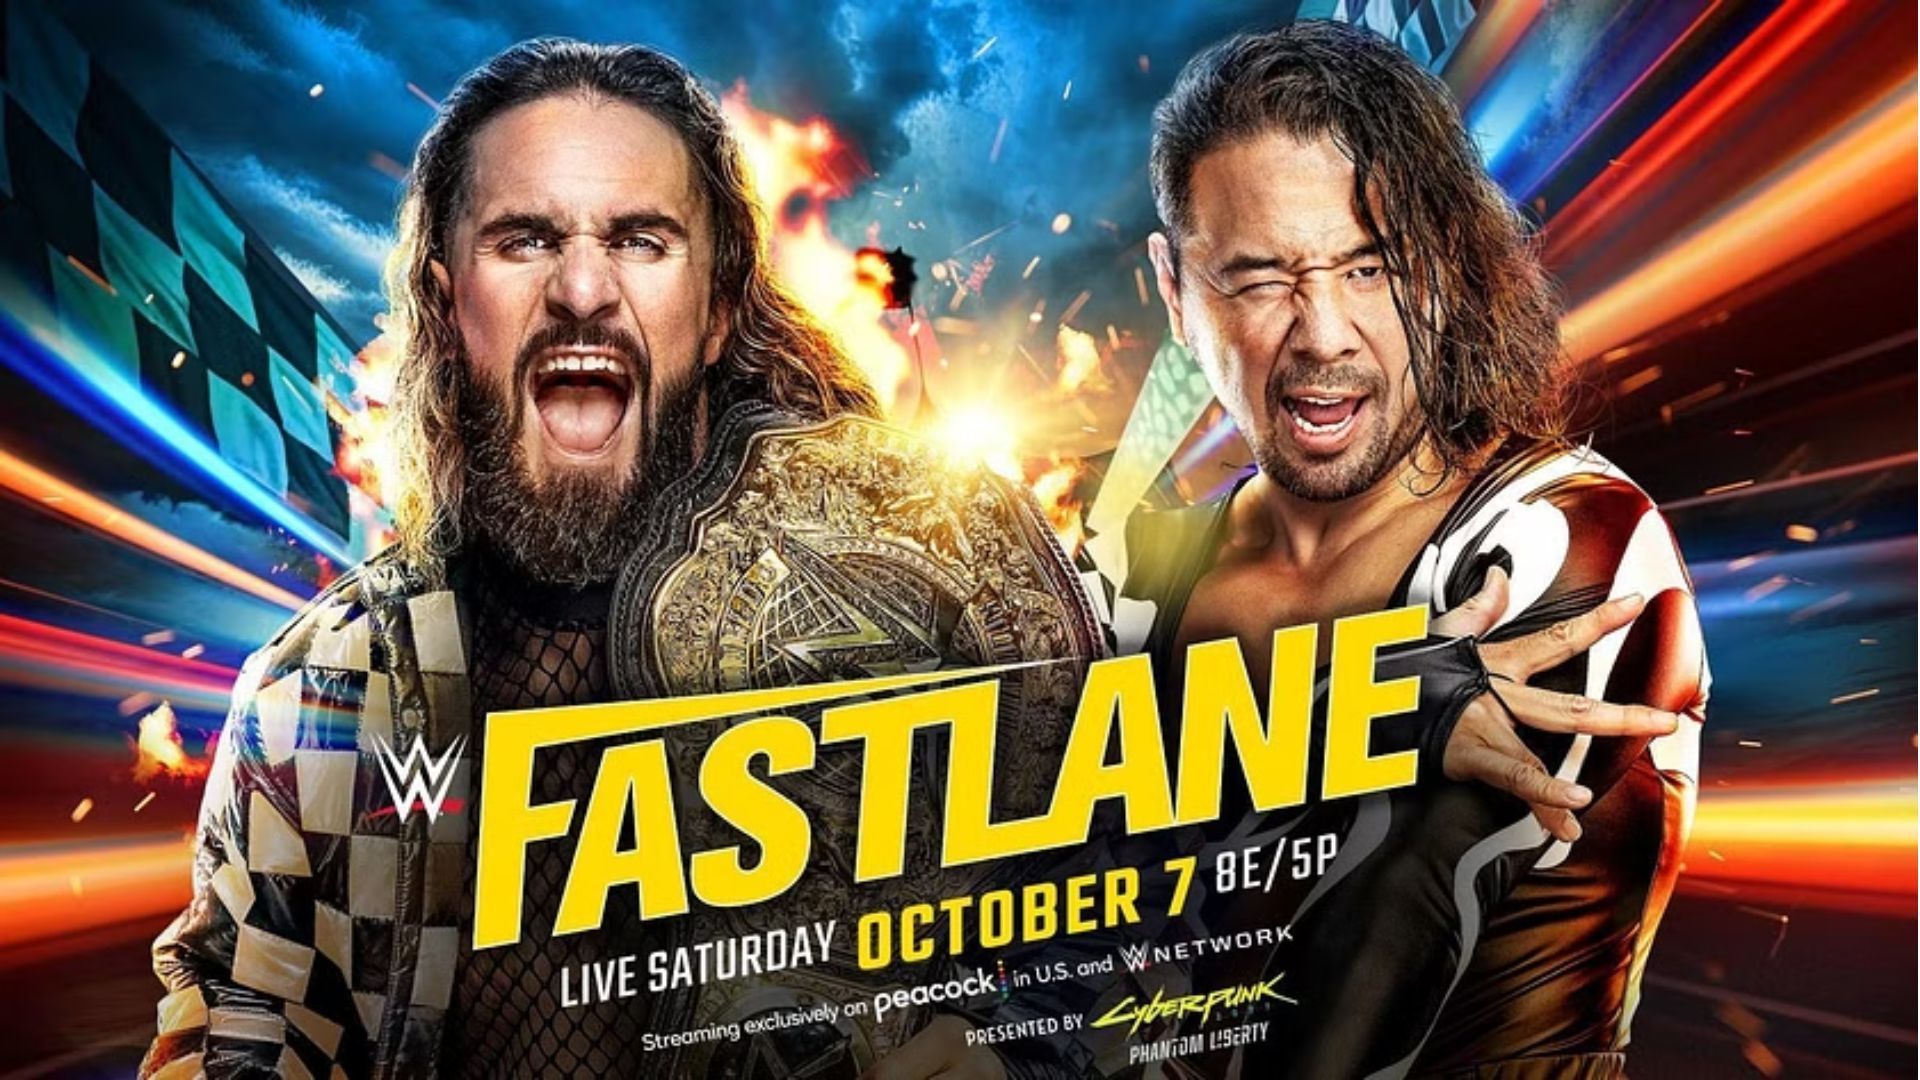 Nakamura challenges Rollins for the title at Fastlane